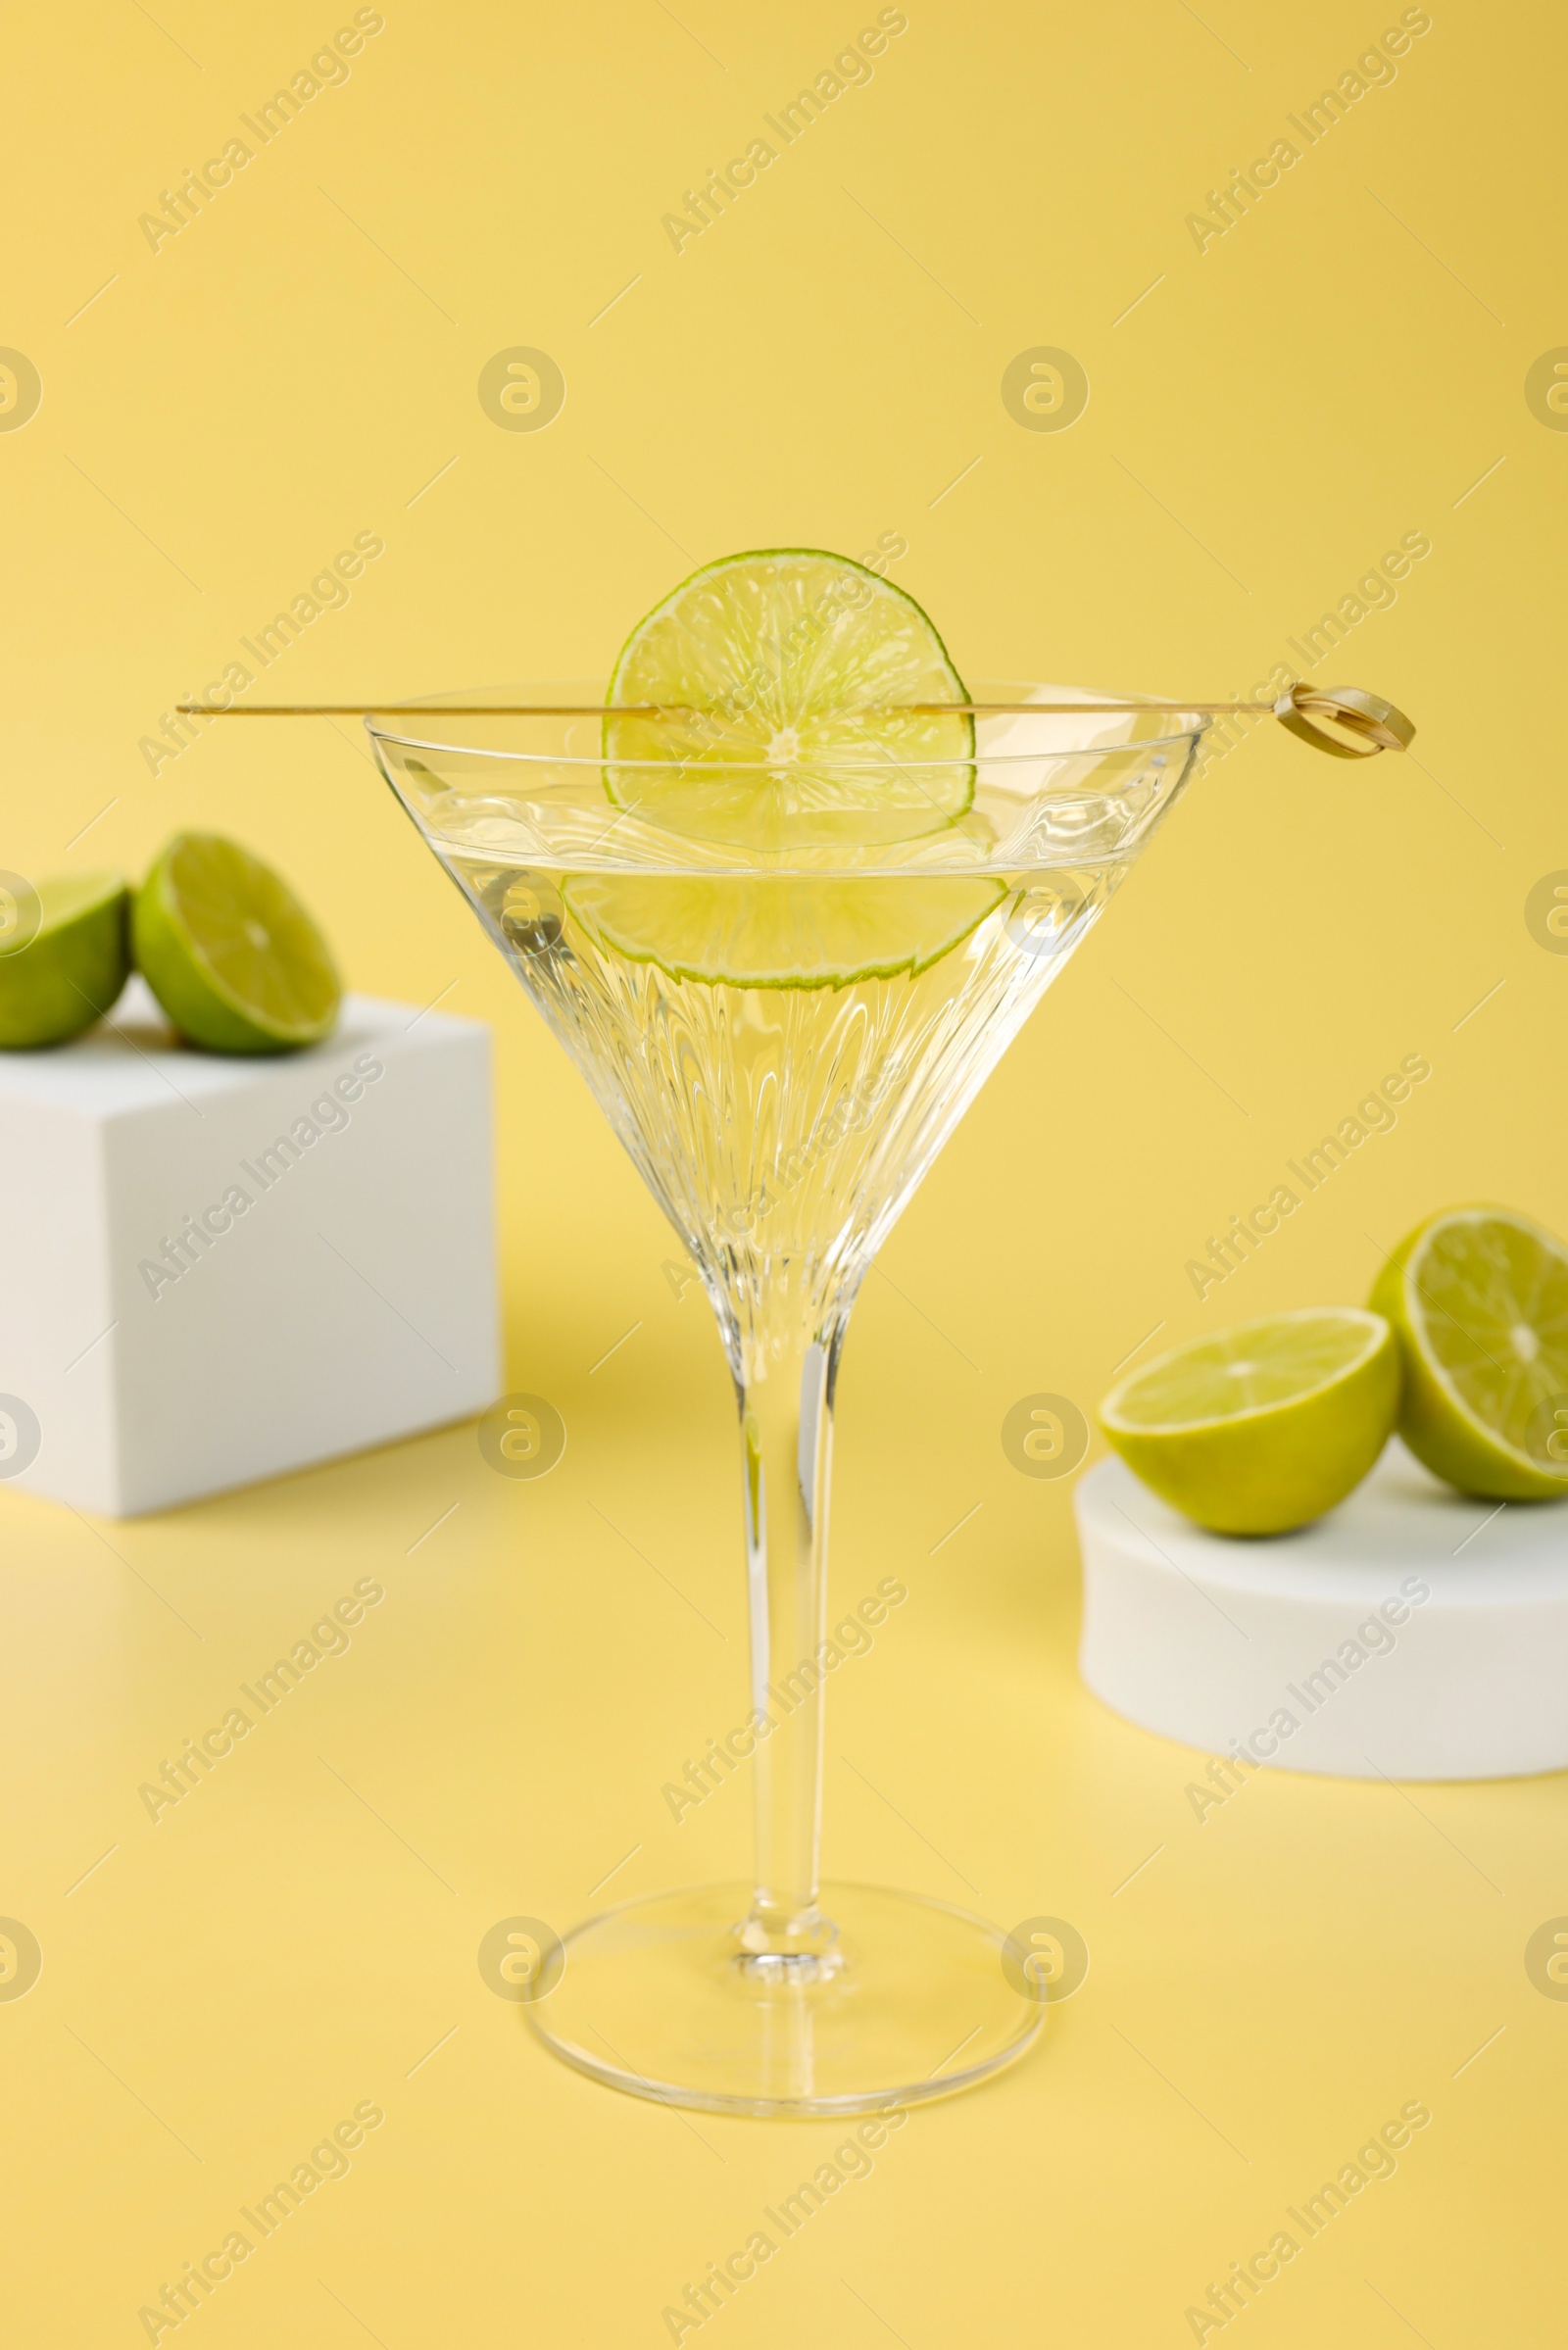 Photo of Martini cocktail with lime slice and fresh fruits on yellow background